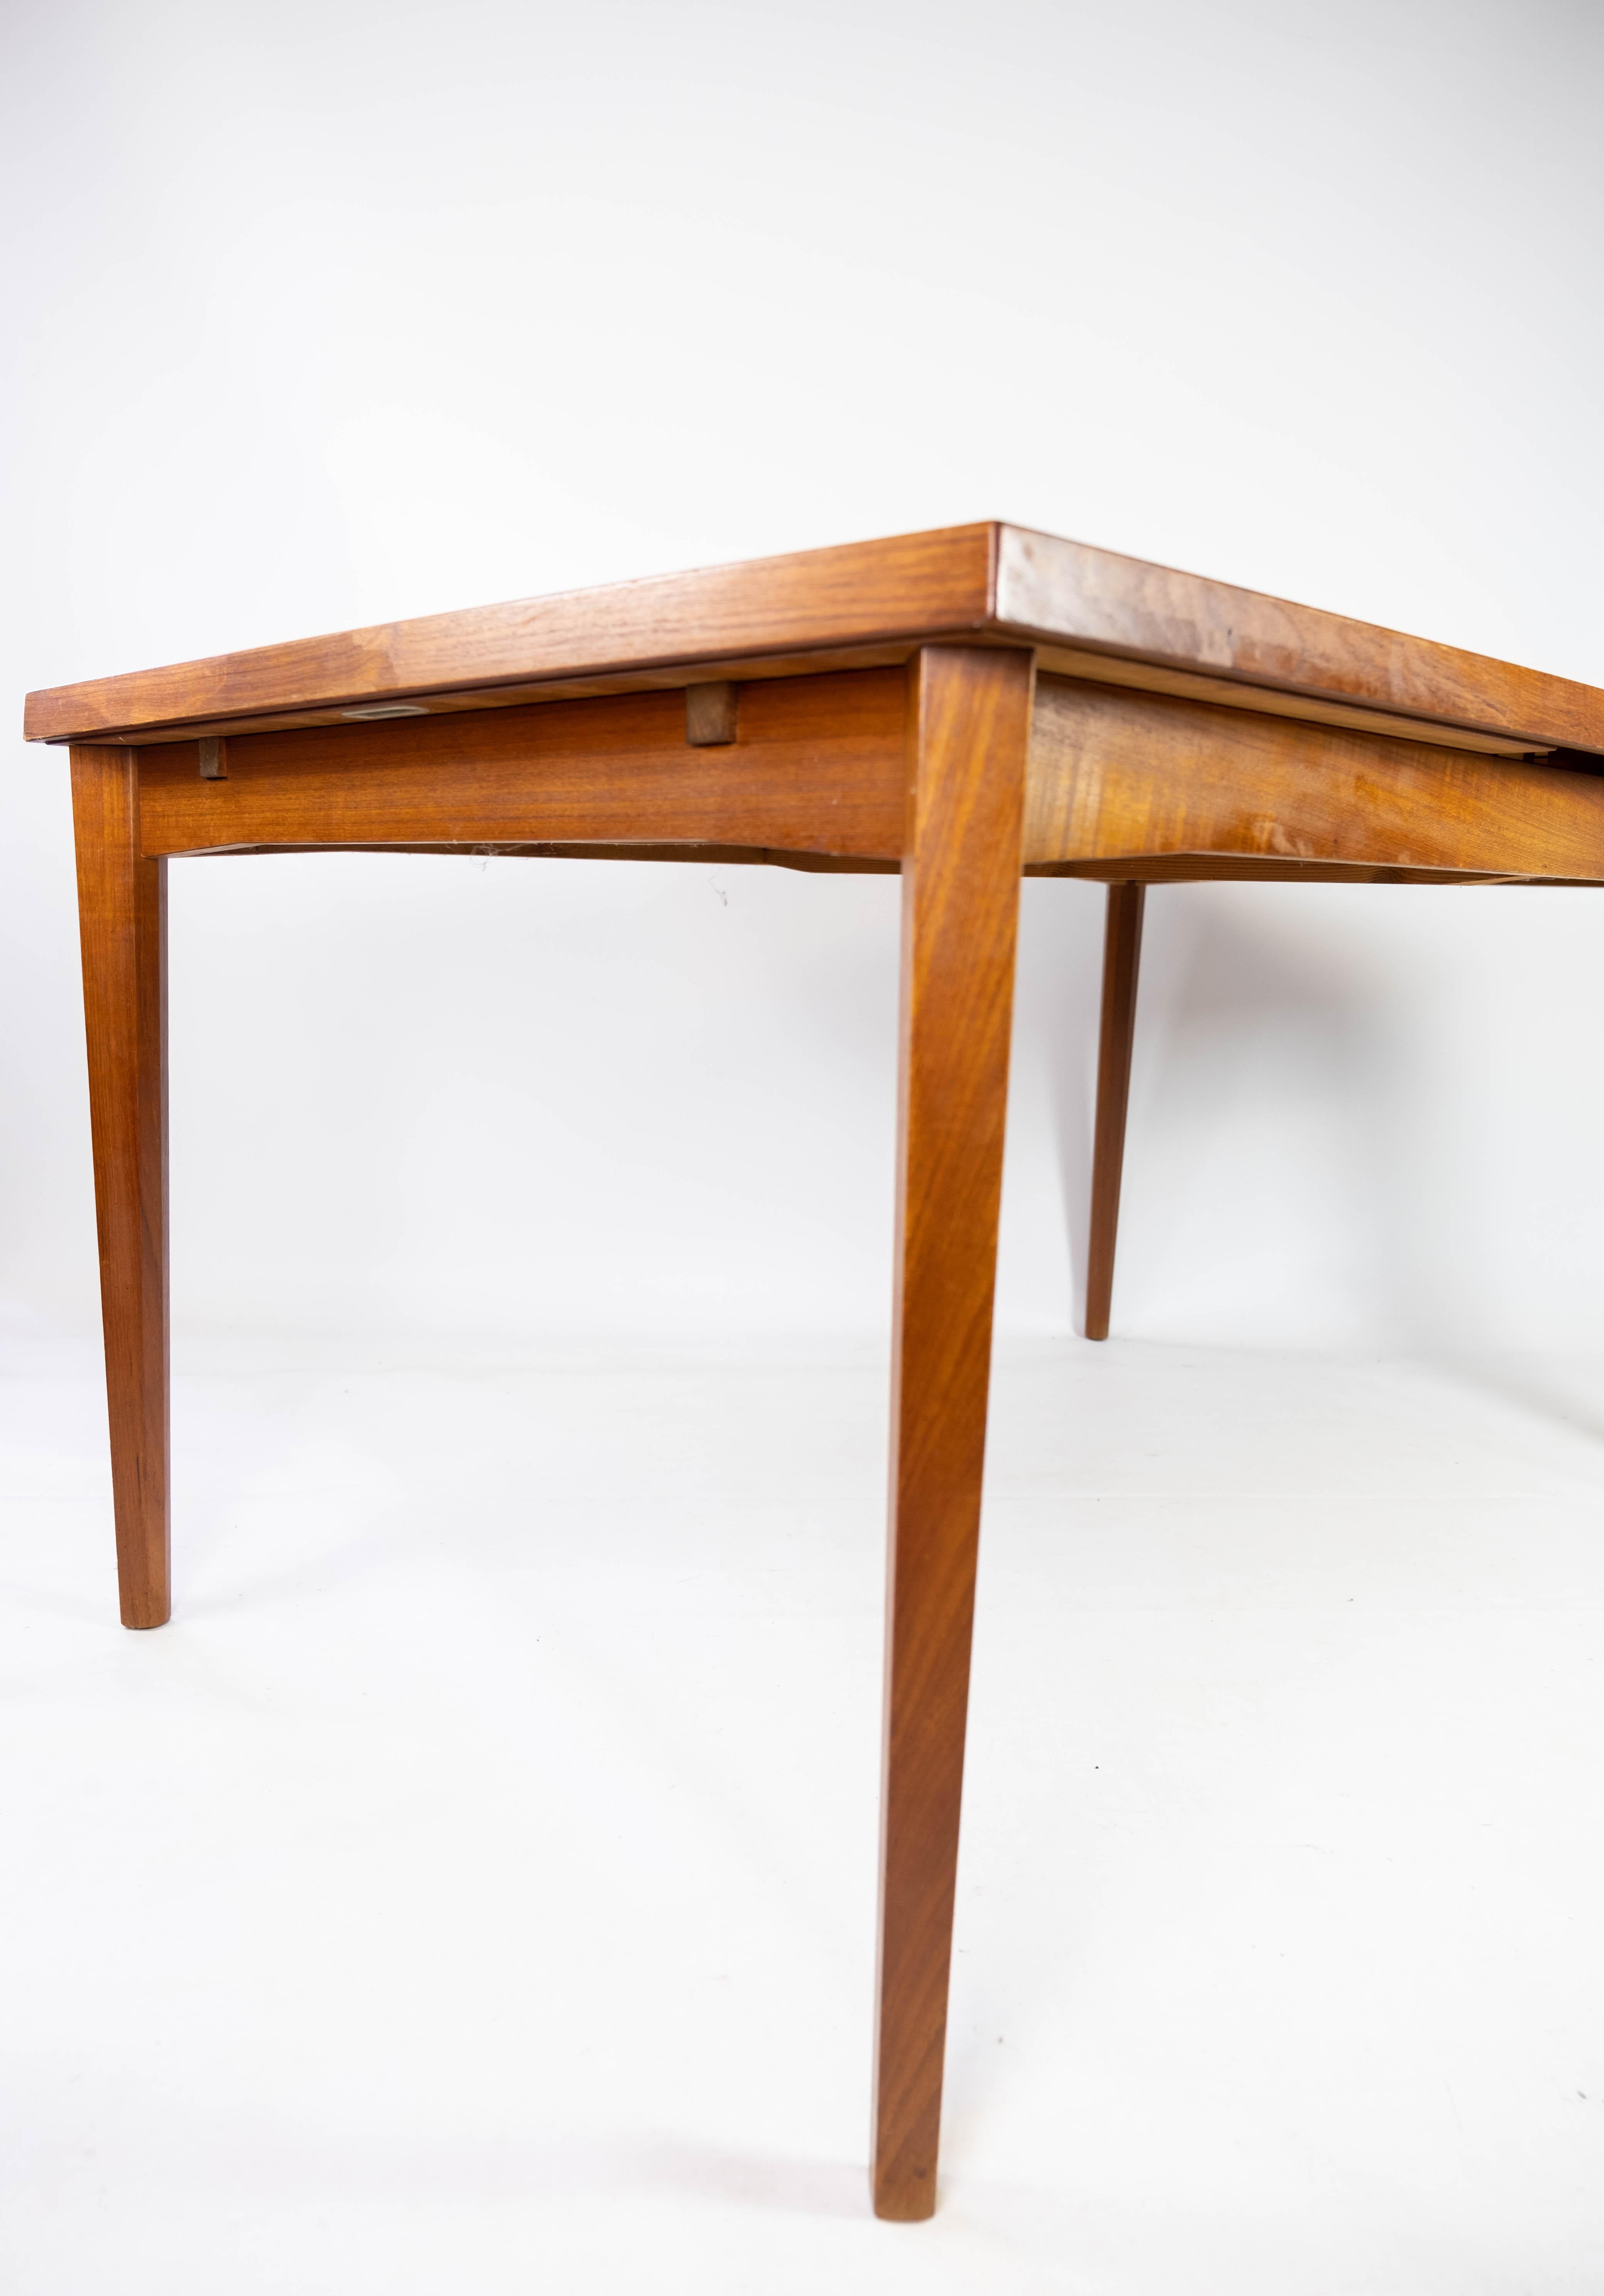 Dining Table With Extensions Made In Teak, Danish Design From 1960s For Sale 2